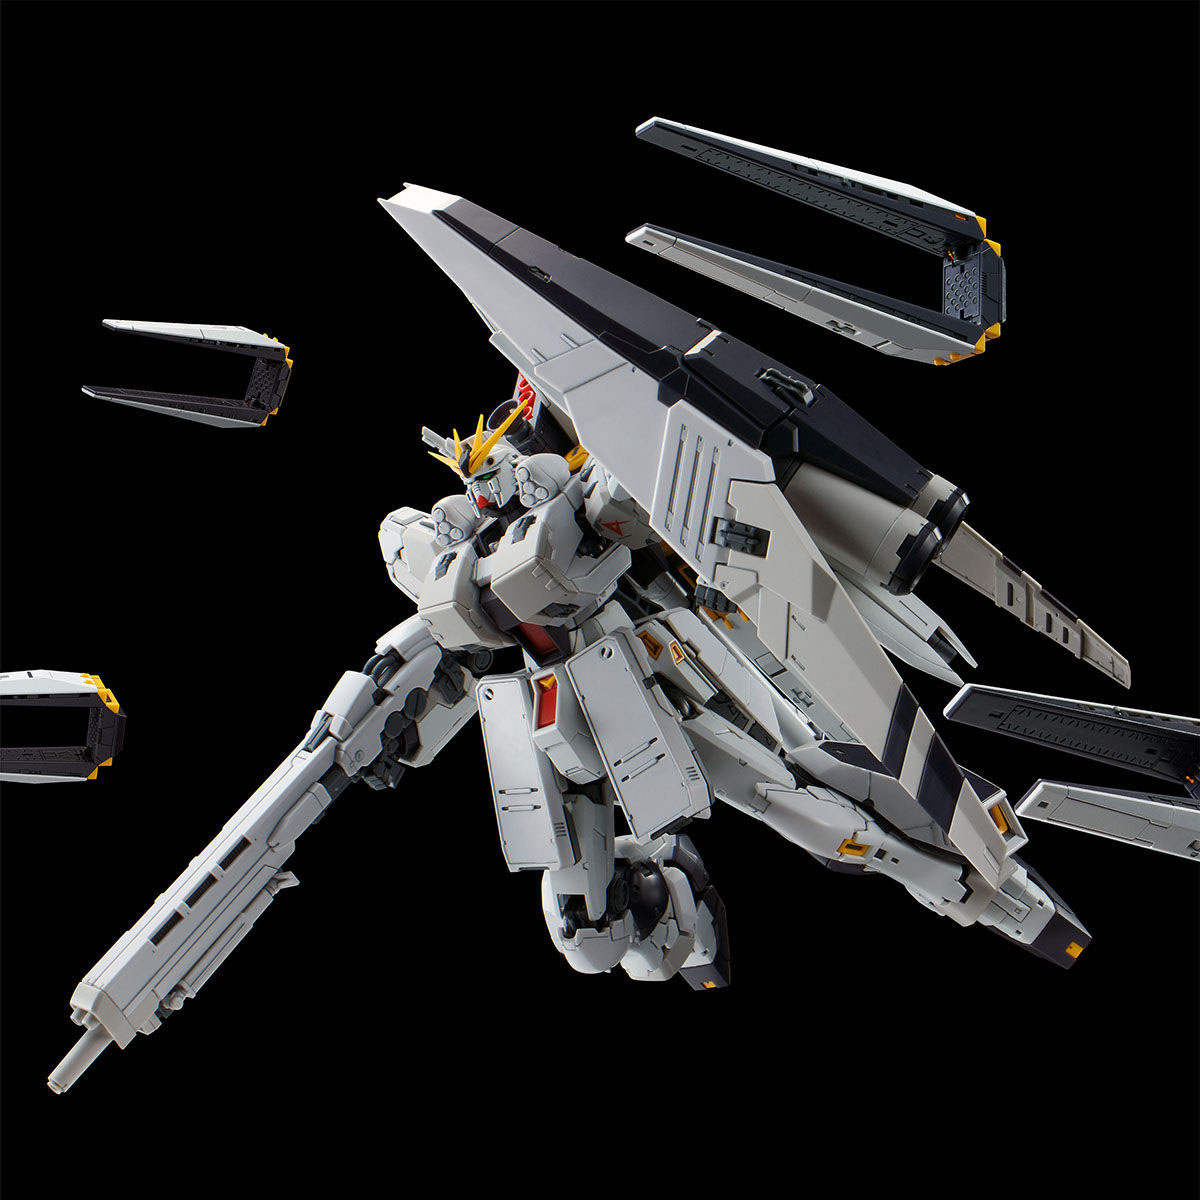 Rg 1 144 N Gundam Hws Oct Delivery Gundam Premium Bandai Singapore Online Store For Action Figures Model Kits Toys And More